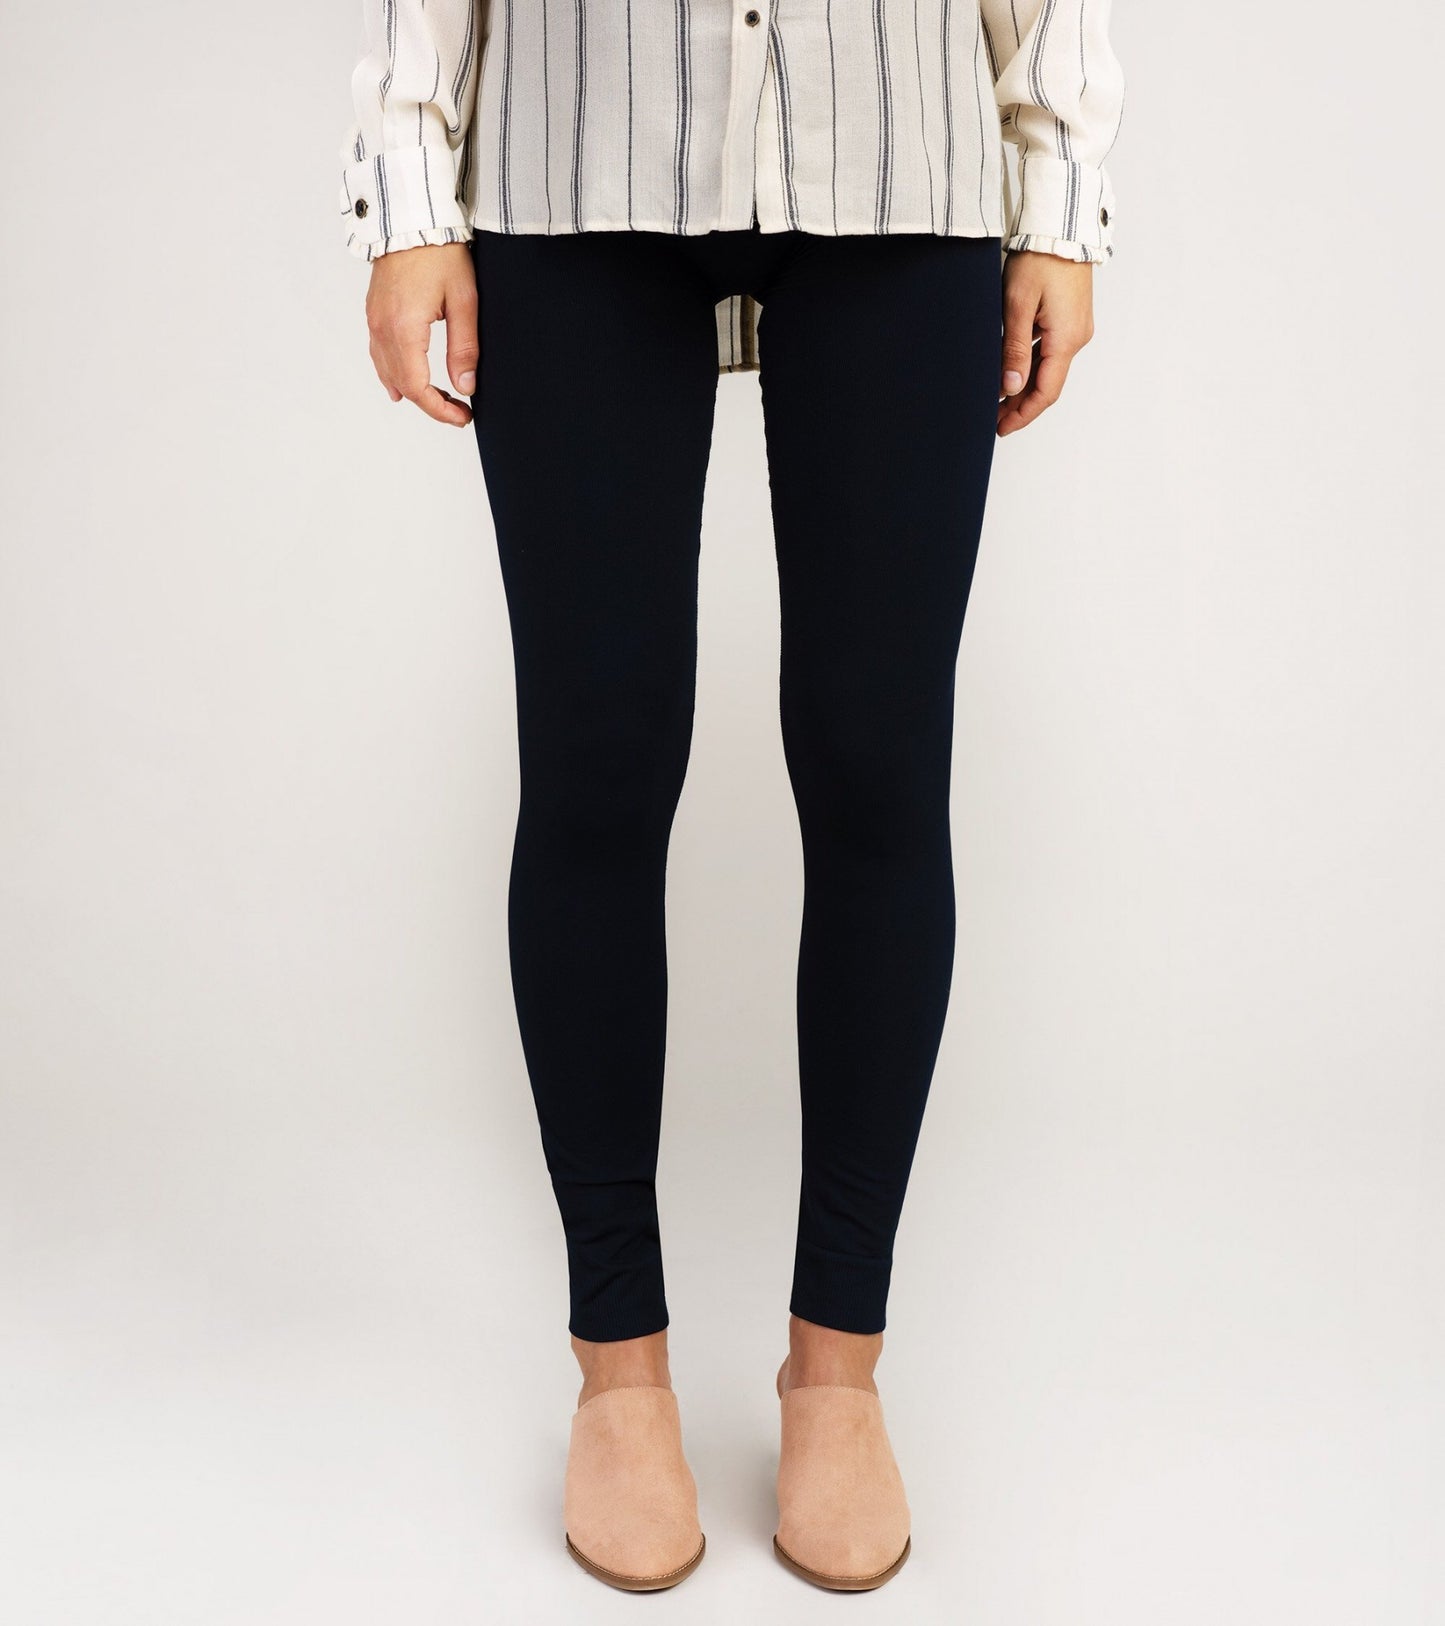 Hatley Navy Seamless Leggings - Sands Boutique clothing and gifts